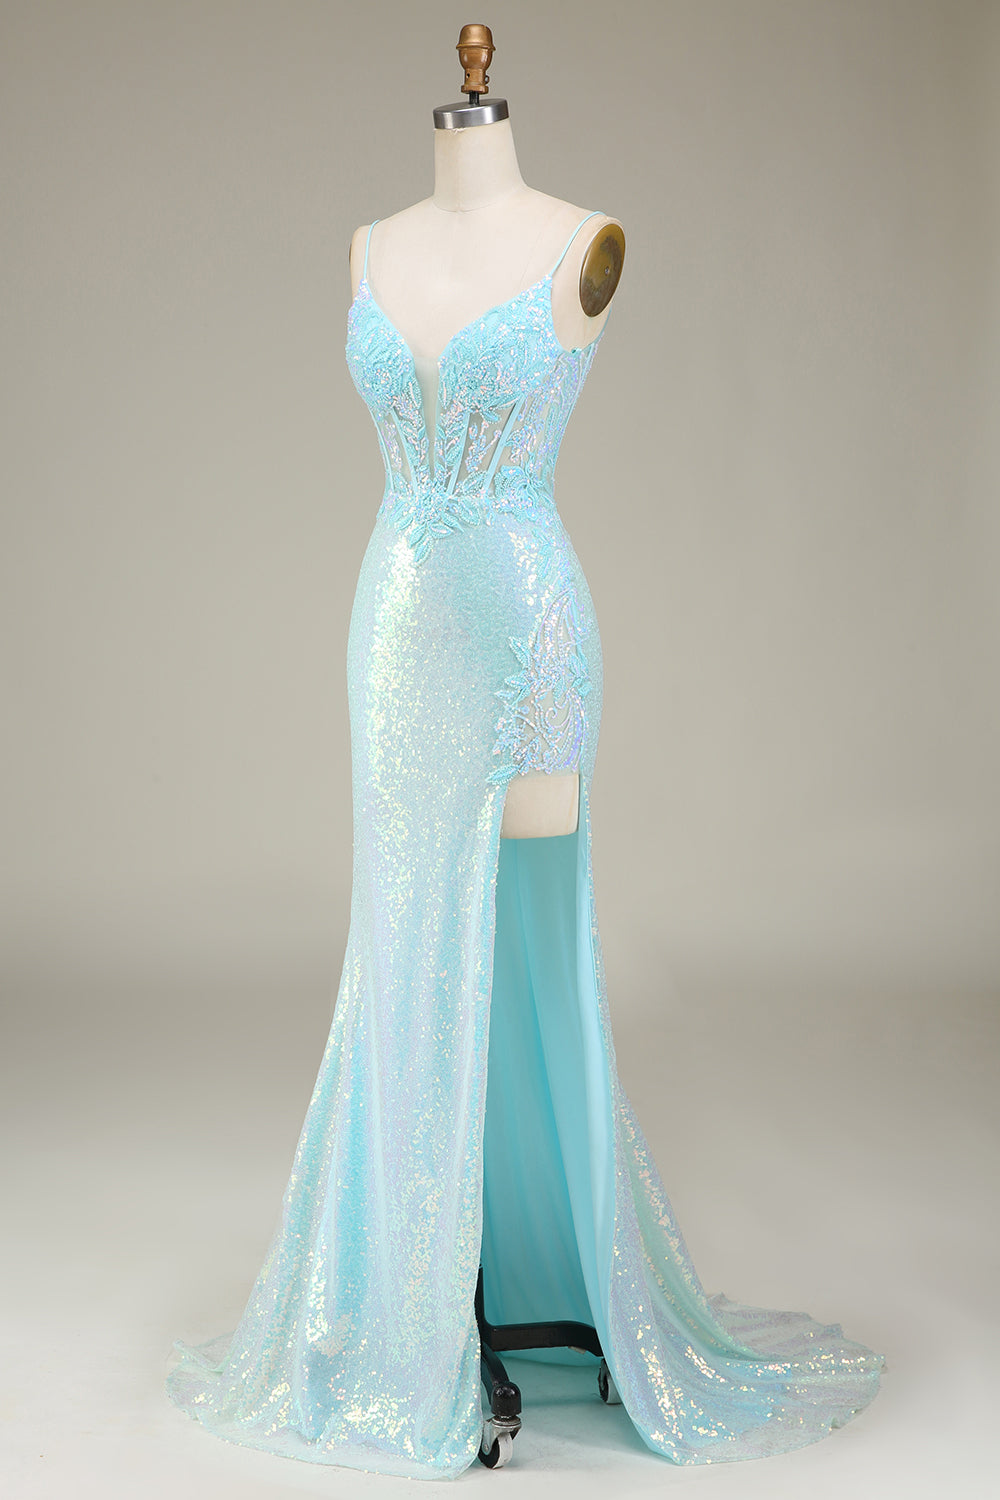 Sparkly Mermaid Sequin Prom Dress with Slit